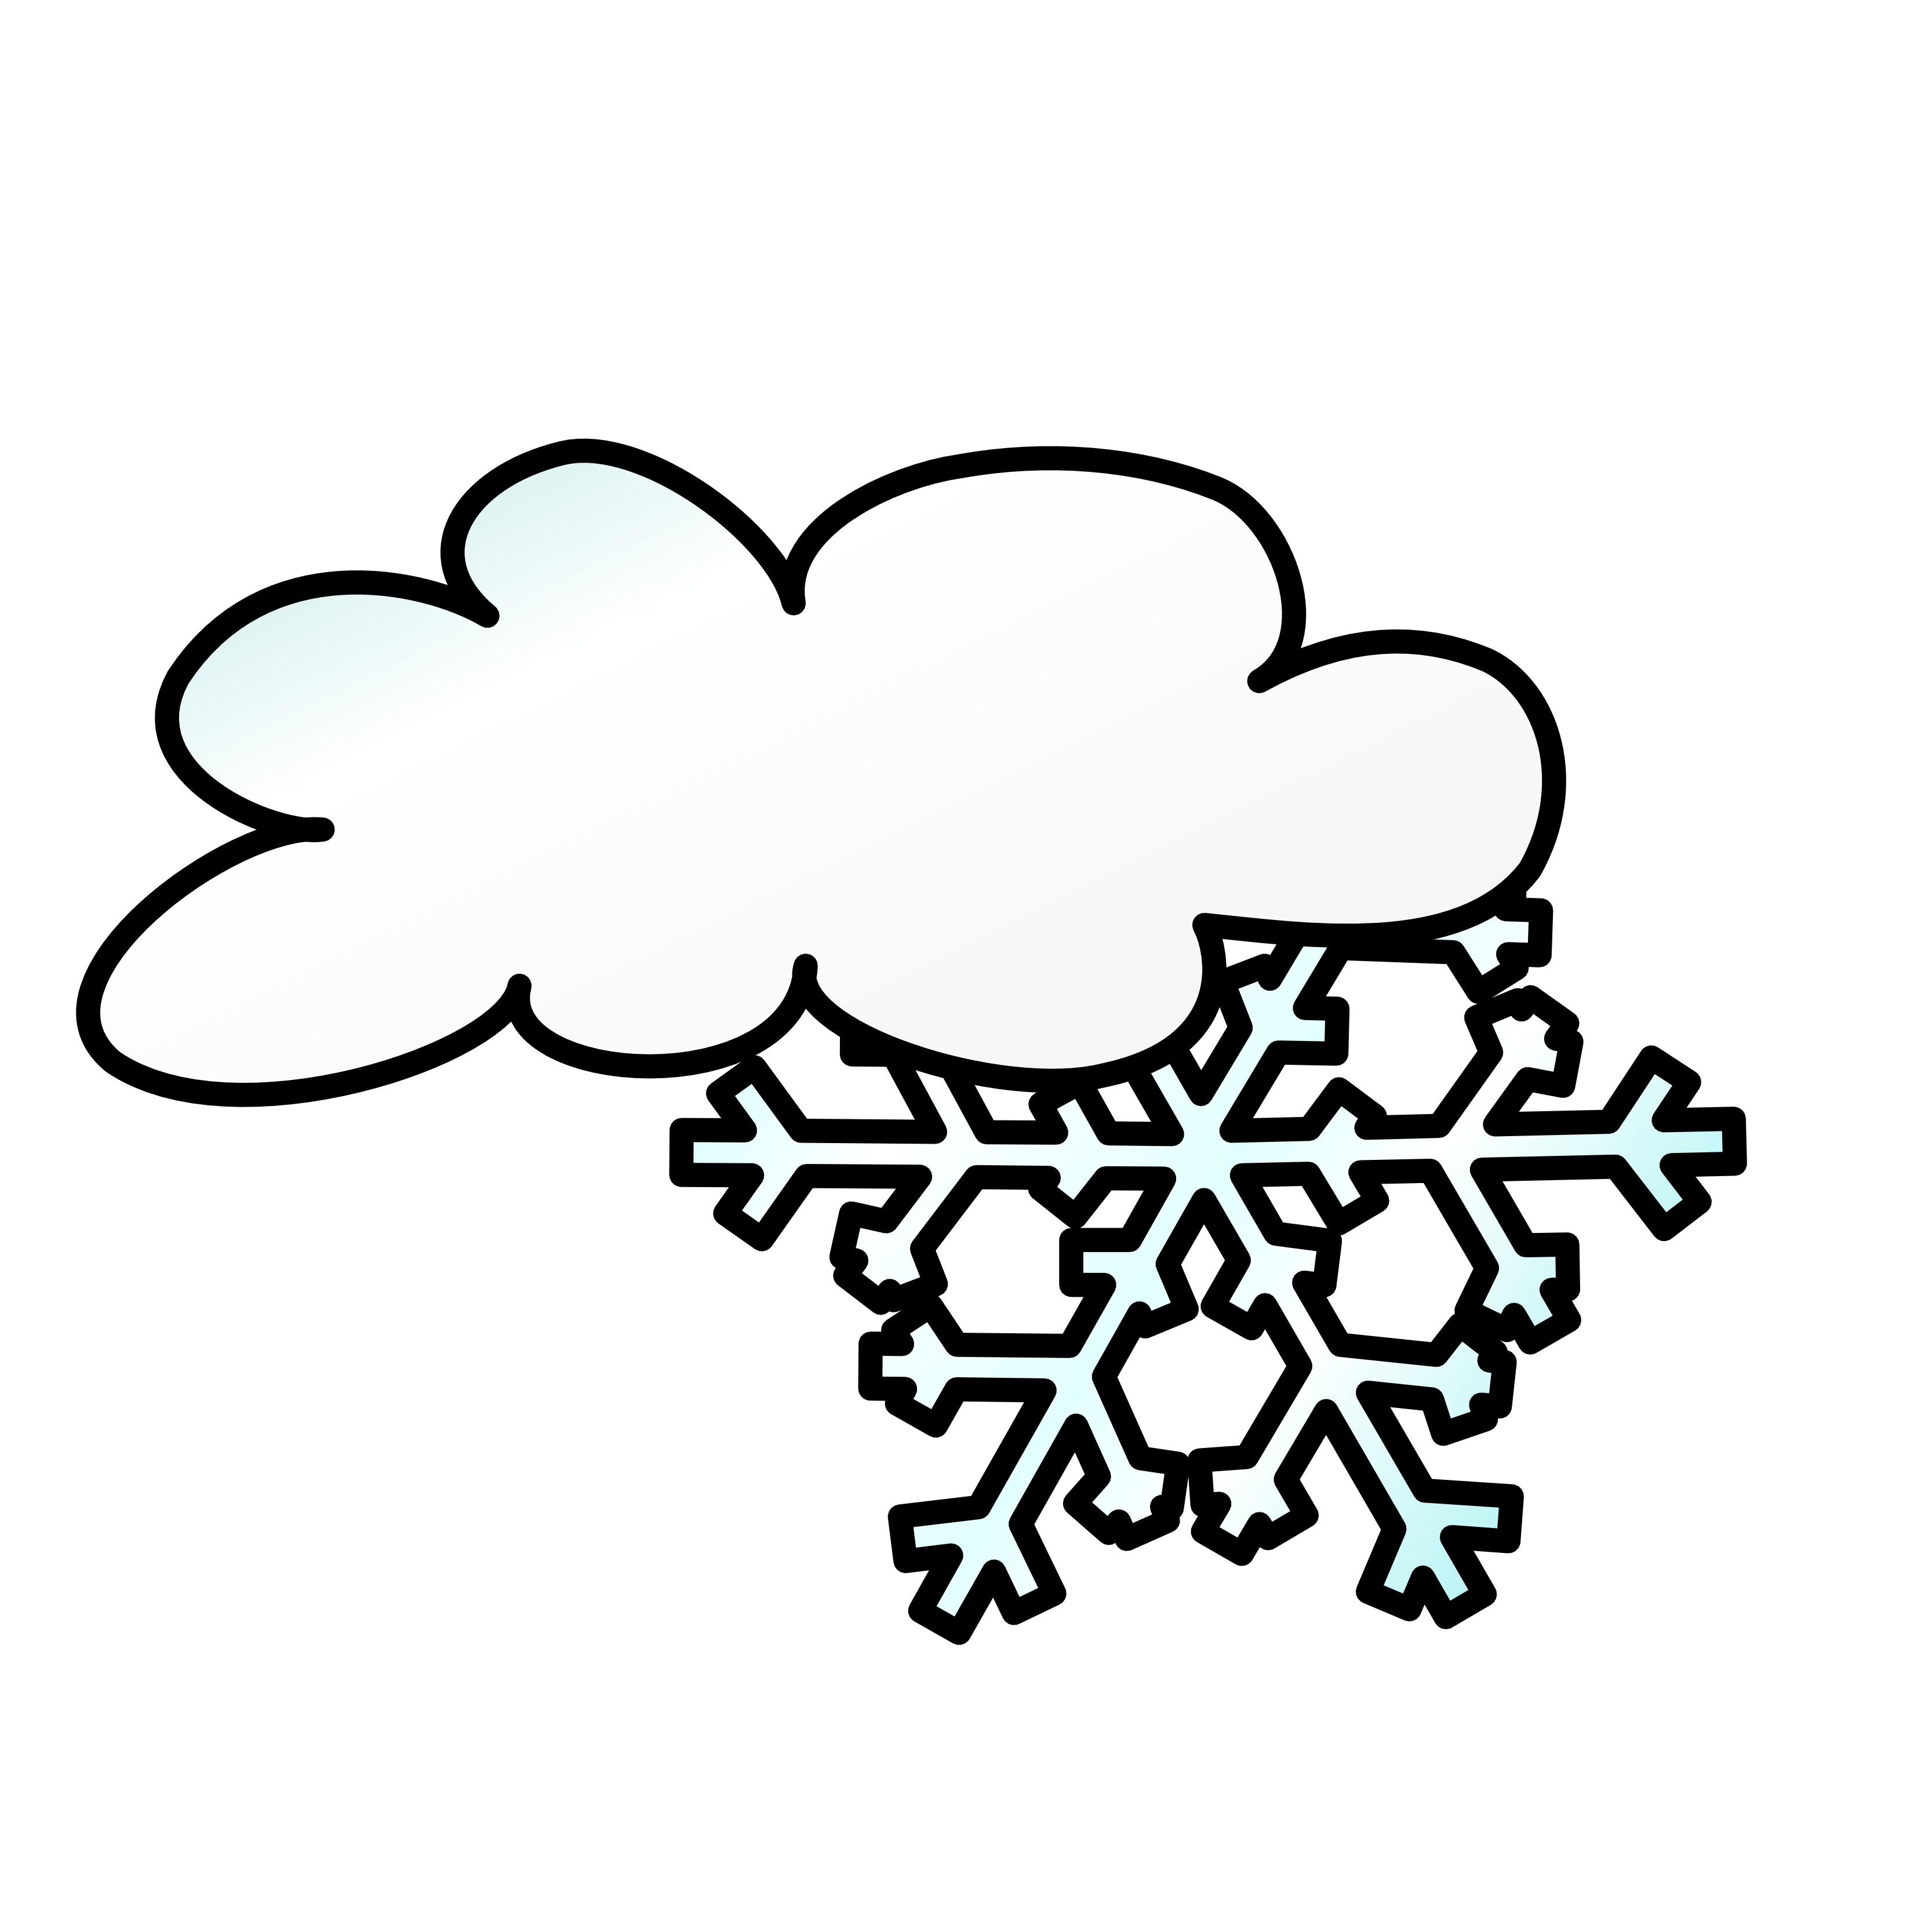 Outline weather forecast icon